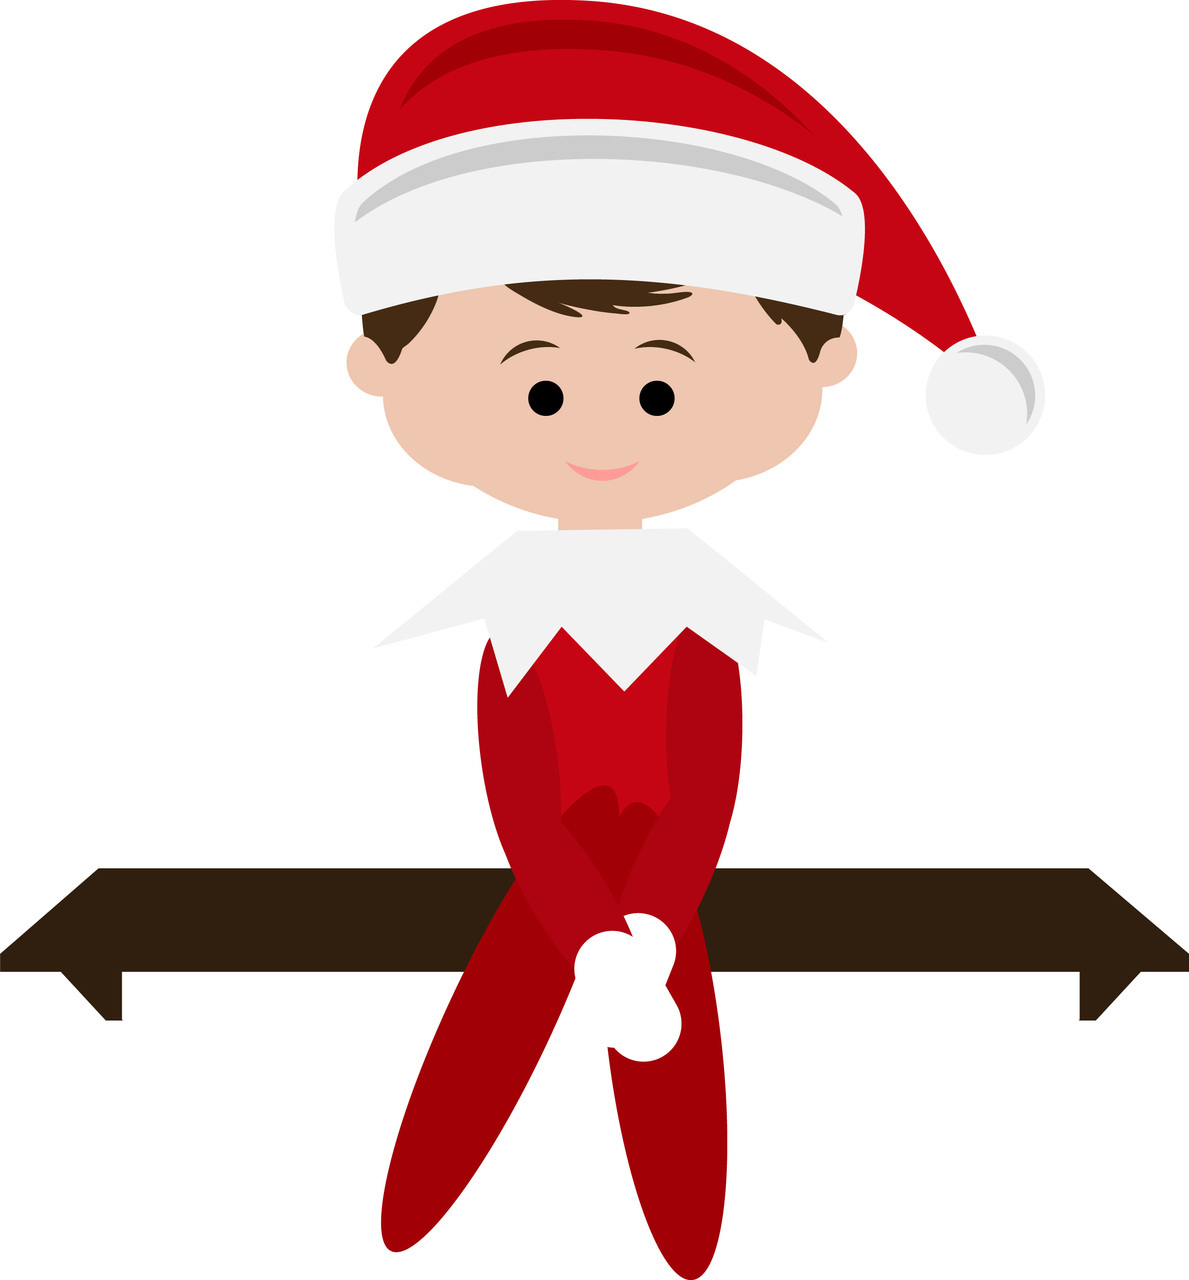 Christmas elf clipart on christmas elf picasa and elves image 4